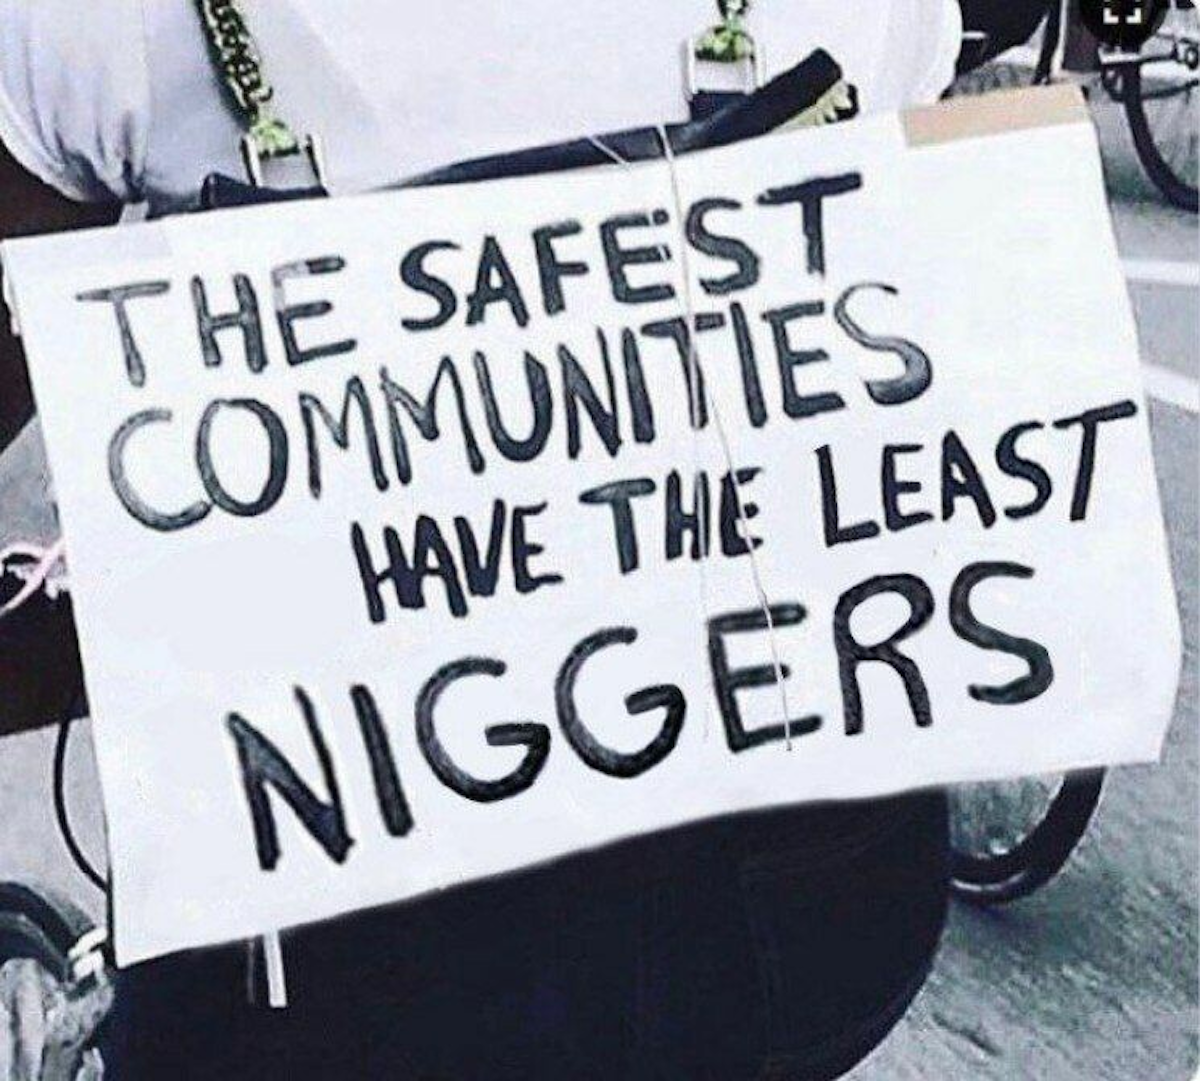 nigs - safe - least niggers.png